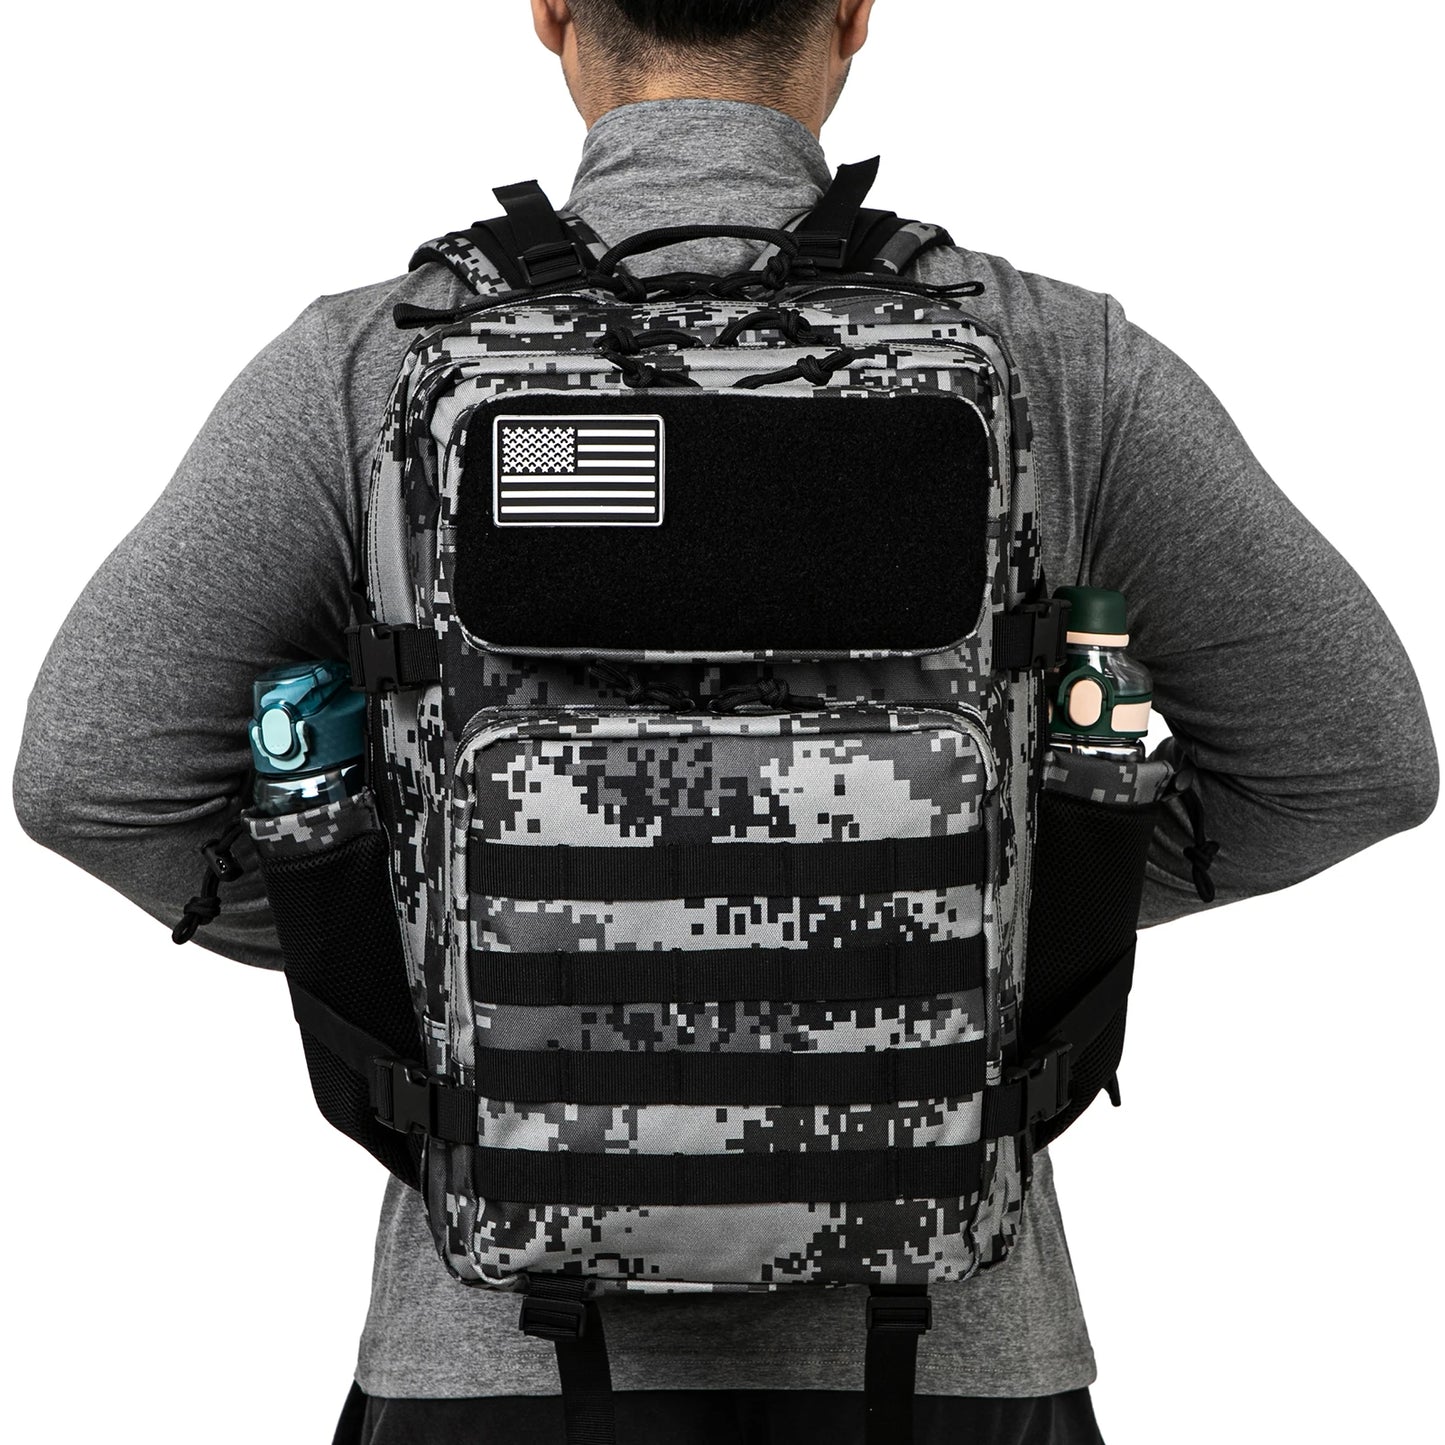 Wild West 45L Tactical Military-Style Backpack: Outdoor, Hiking, and Hunting Gear Bag with MOLLE System and Water Bottle Holder